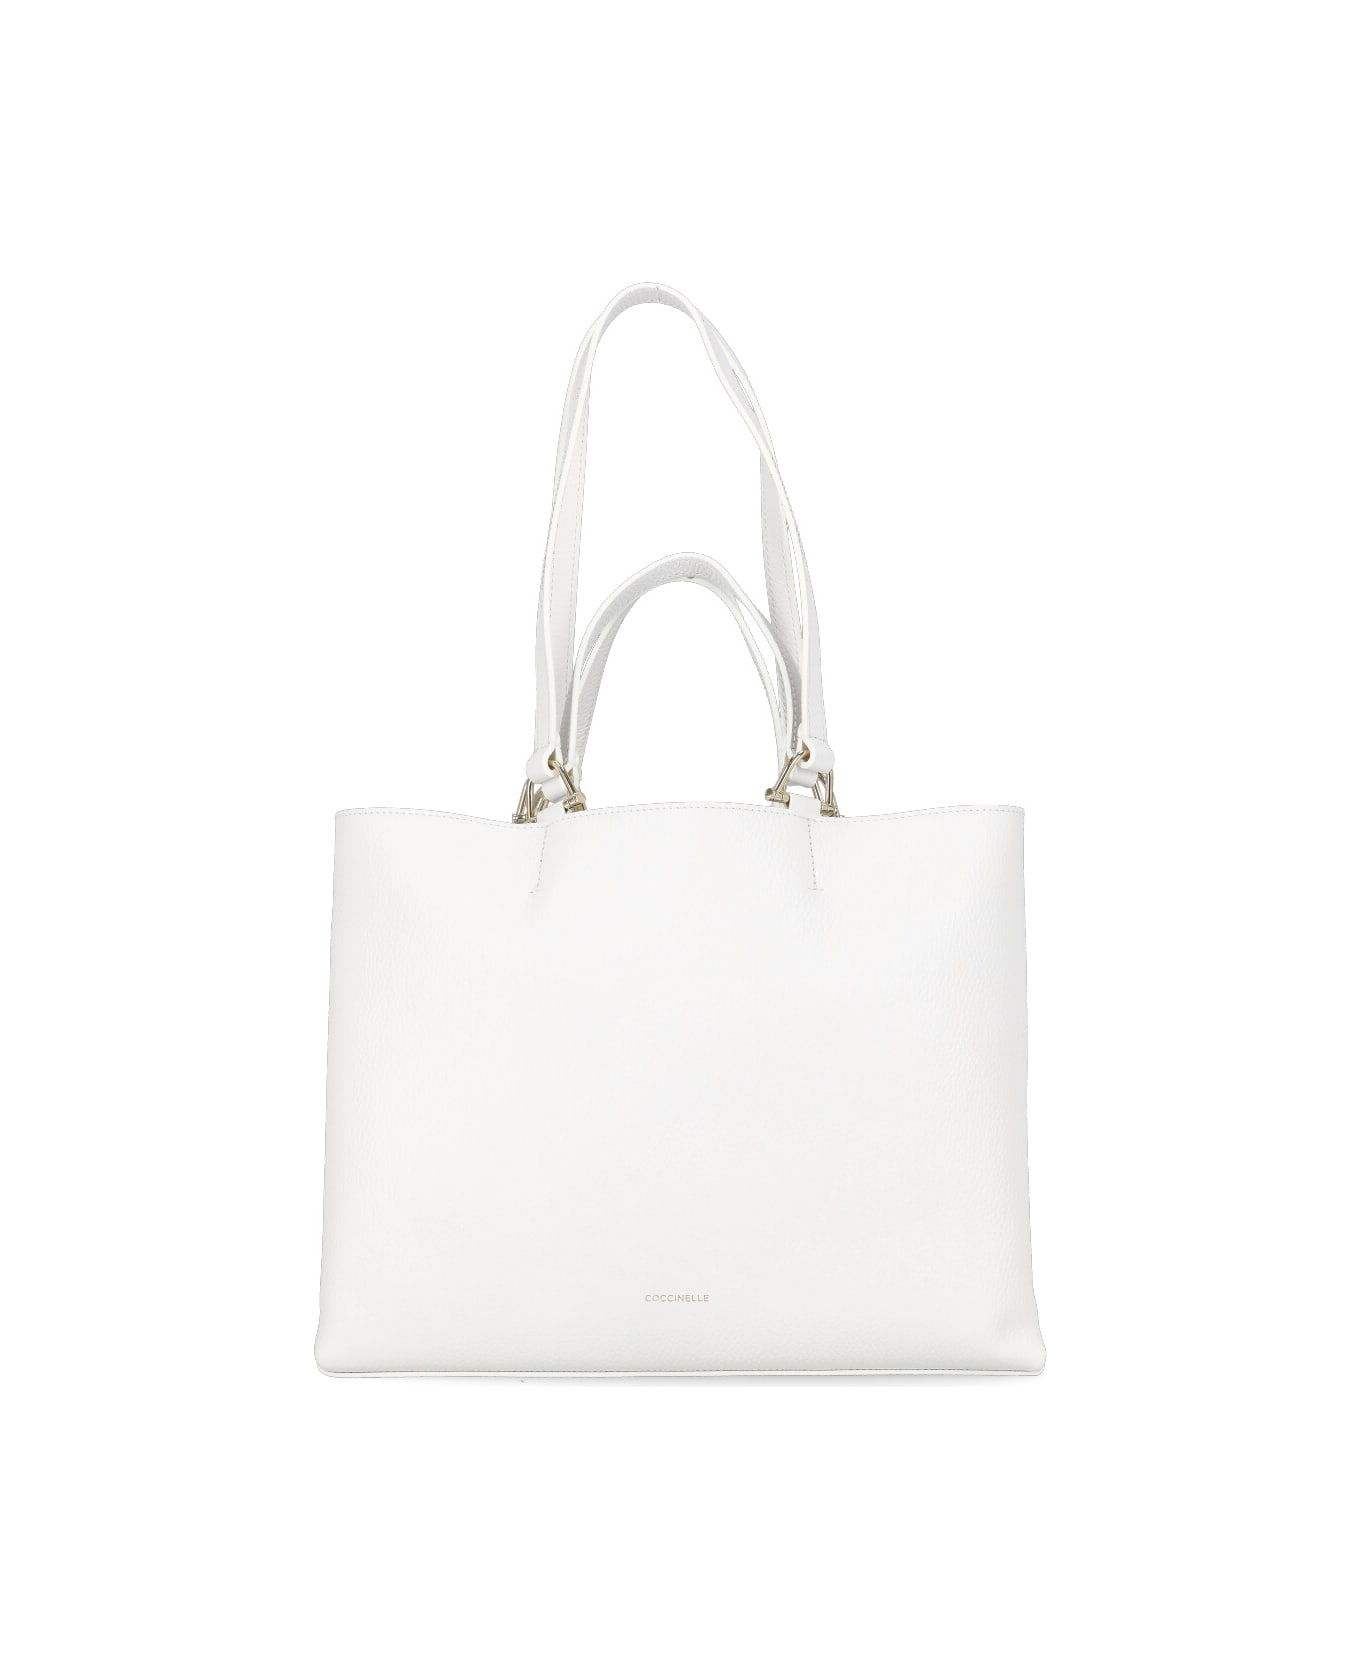 Coccinelle Hop On Bag - White